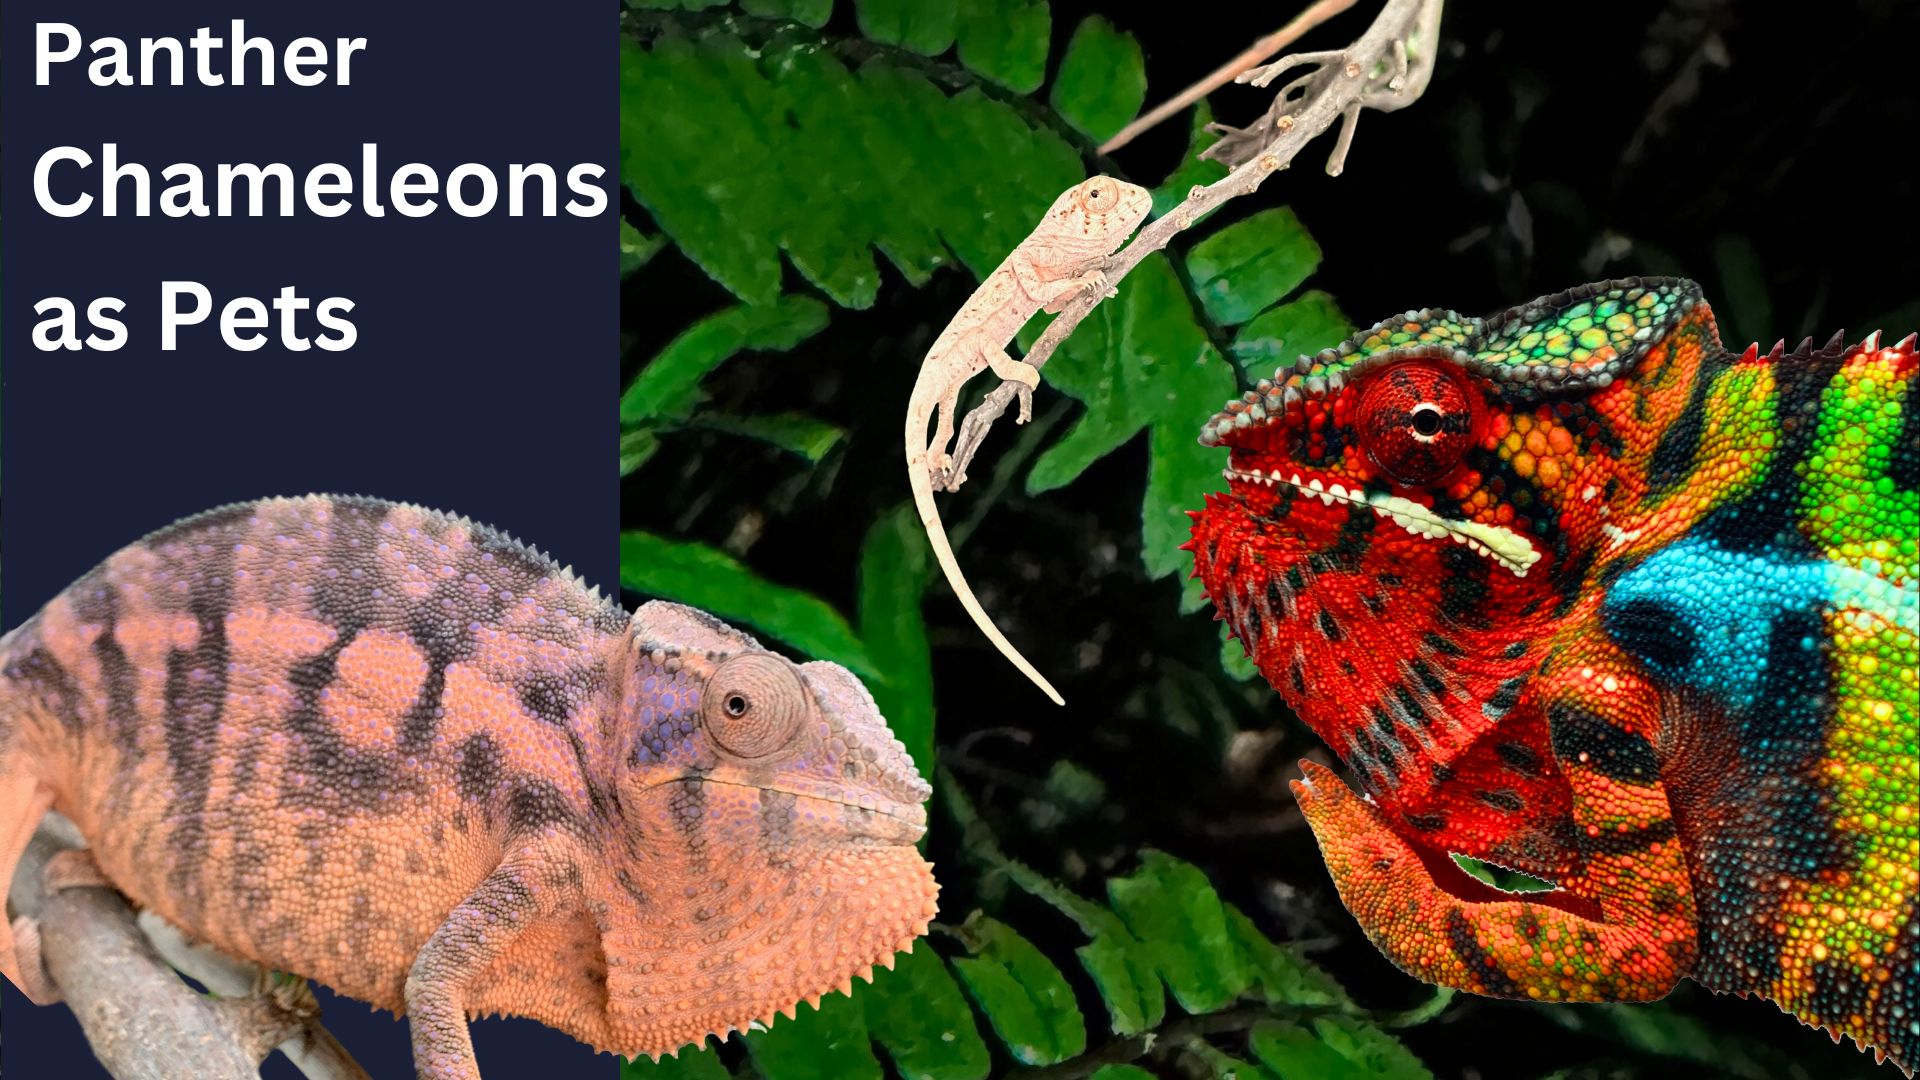 Should You Keep a Panther Chameleon as a Pet?